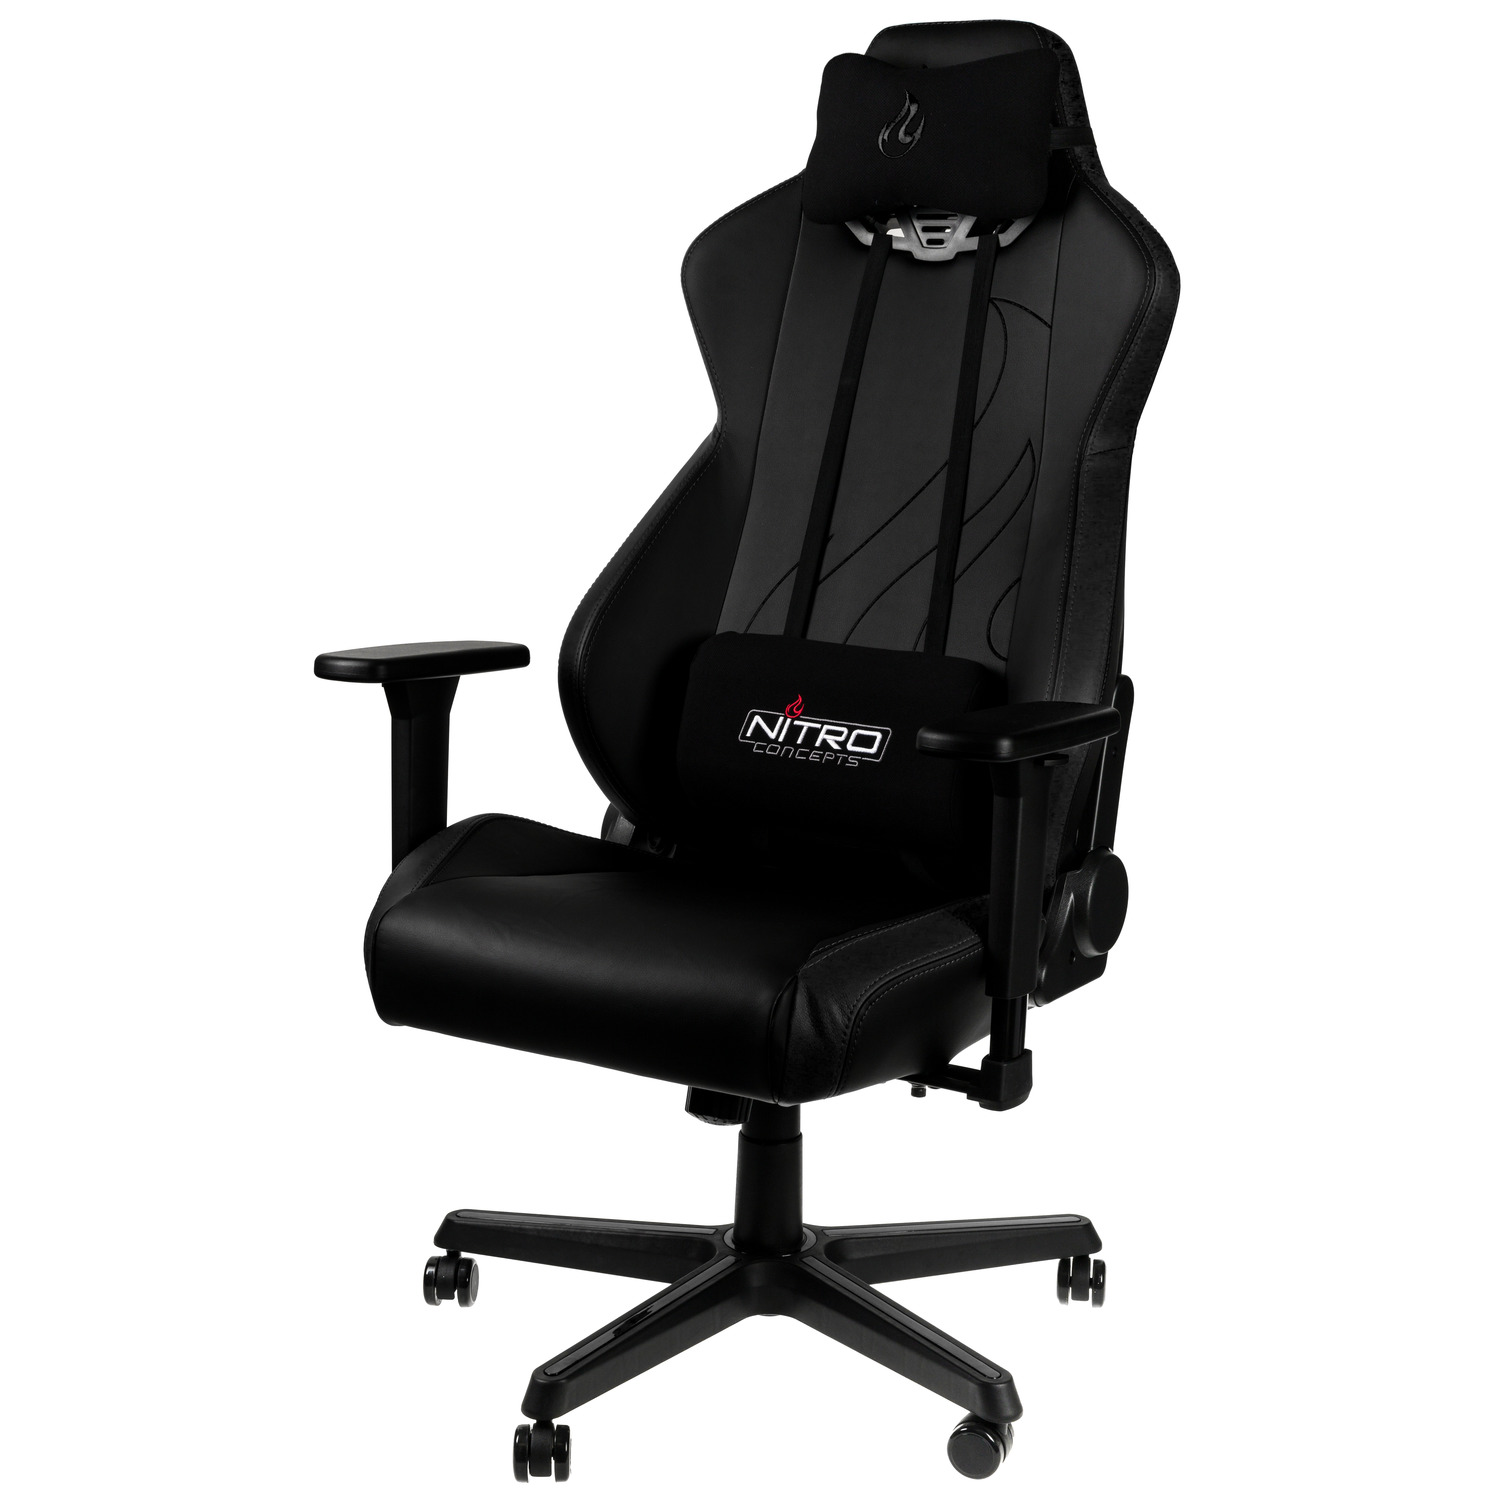 Nitro Concepts - S300 EX Gaming Chair - Stealth Black